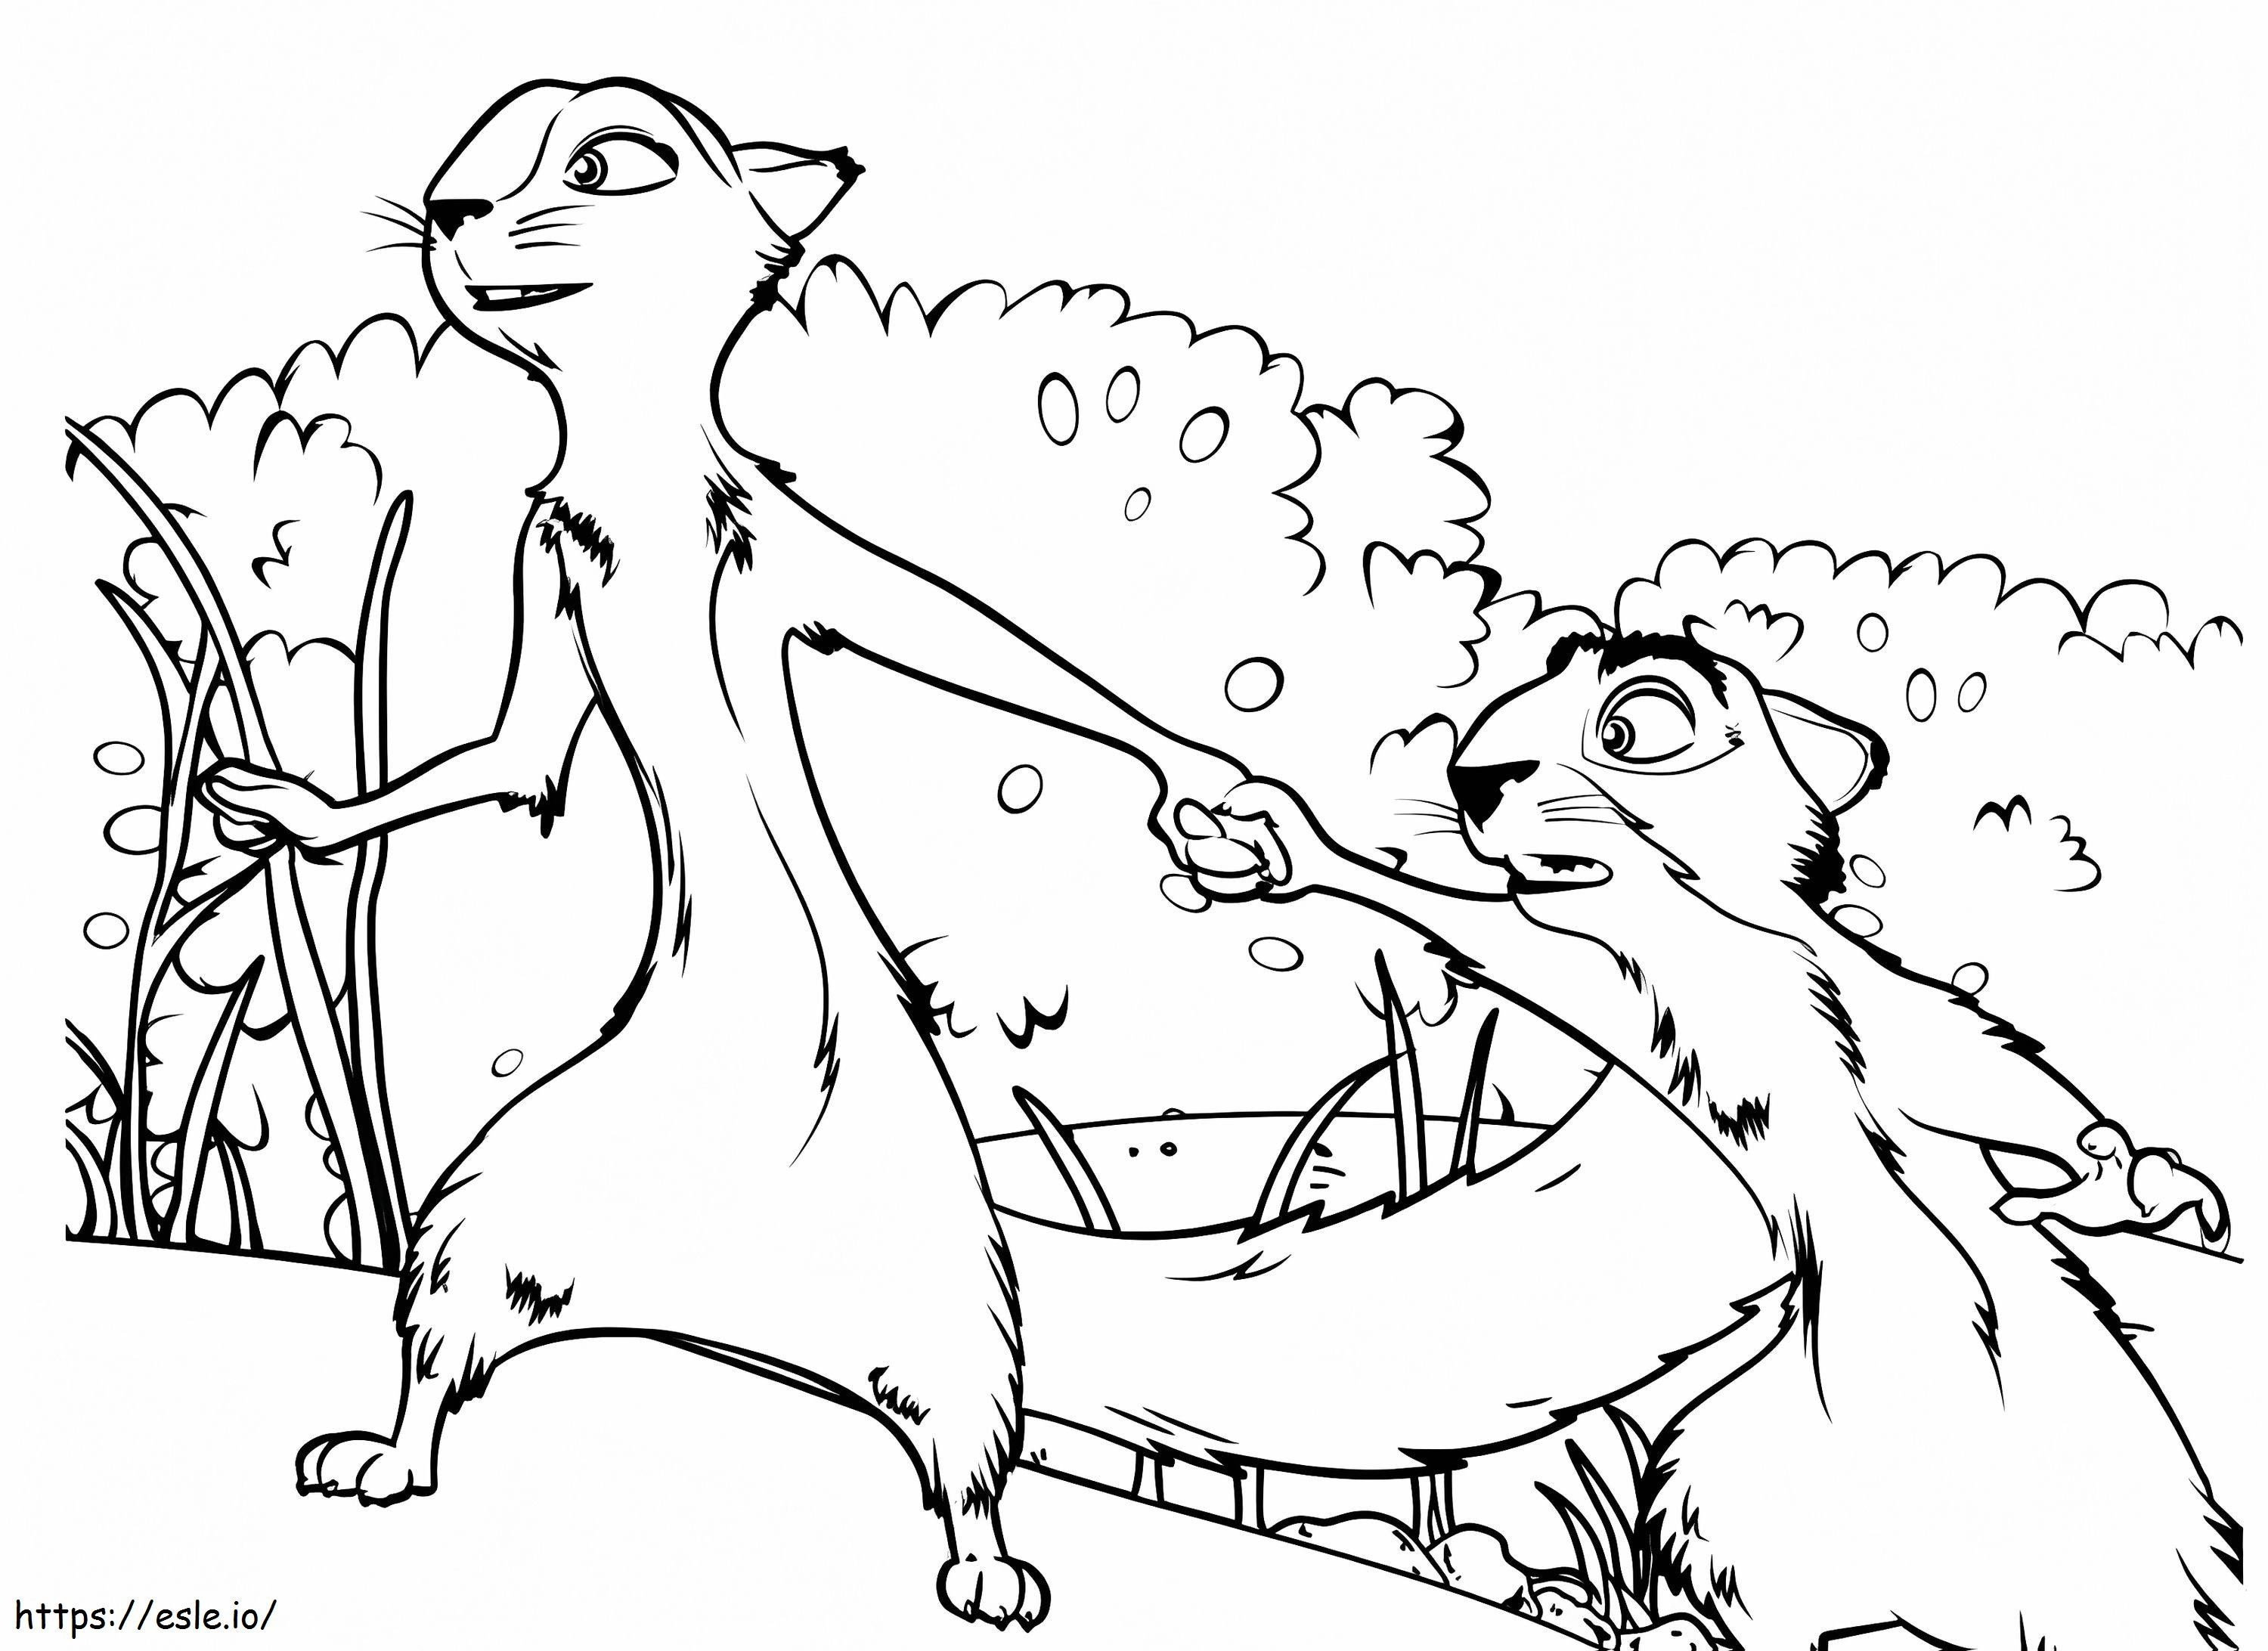 Andie And Surly From The Nut Job coloring page